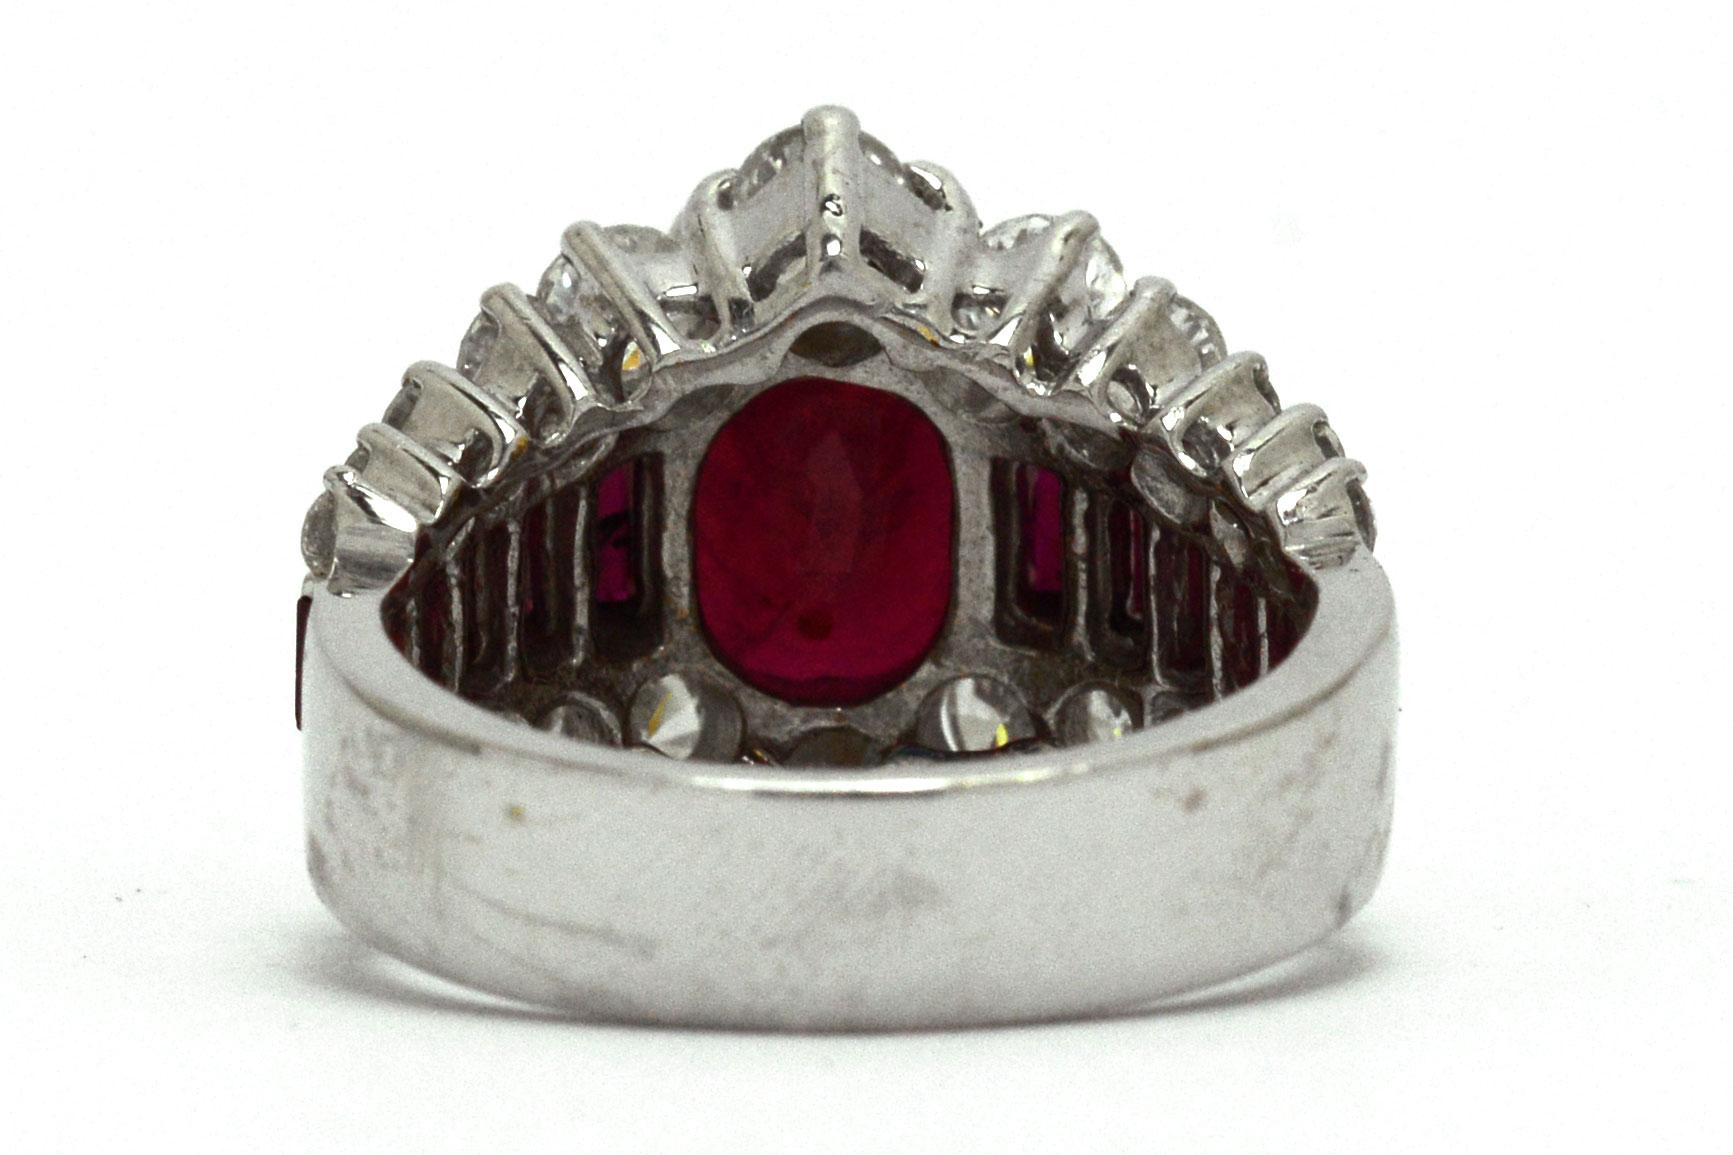 Oval Cut Ruby Diamond Cocktail Ring Large Wide Band Over 7 Carat Vintage Estate Heirloom